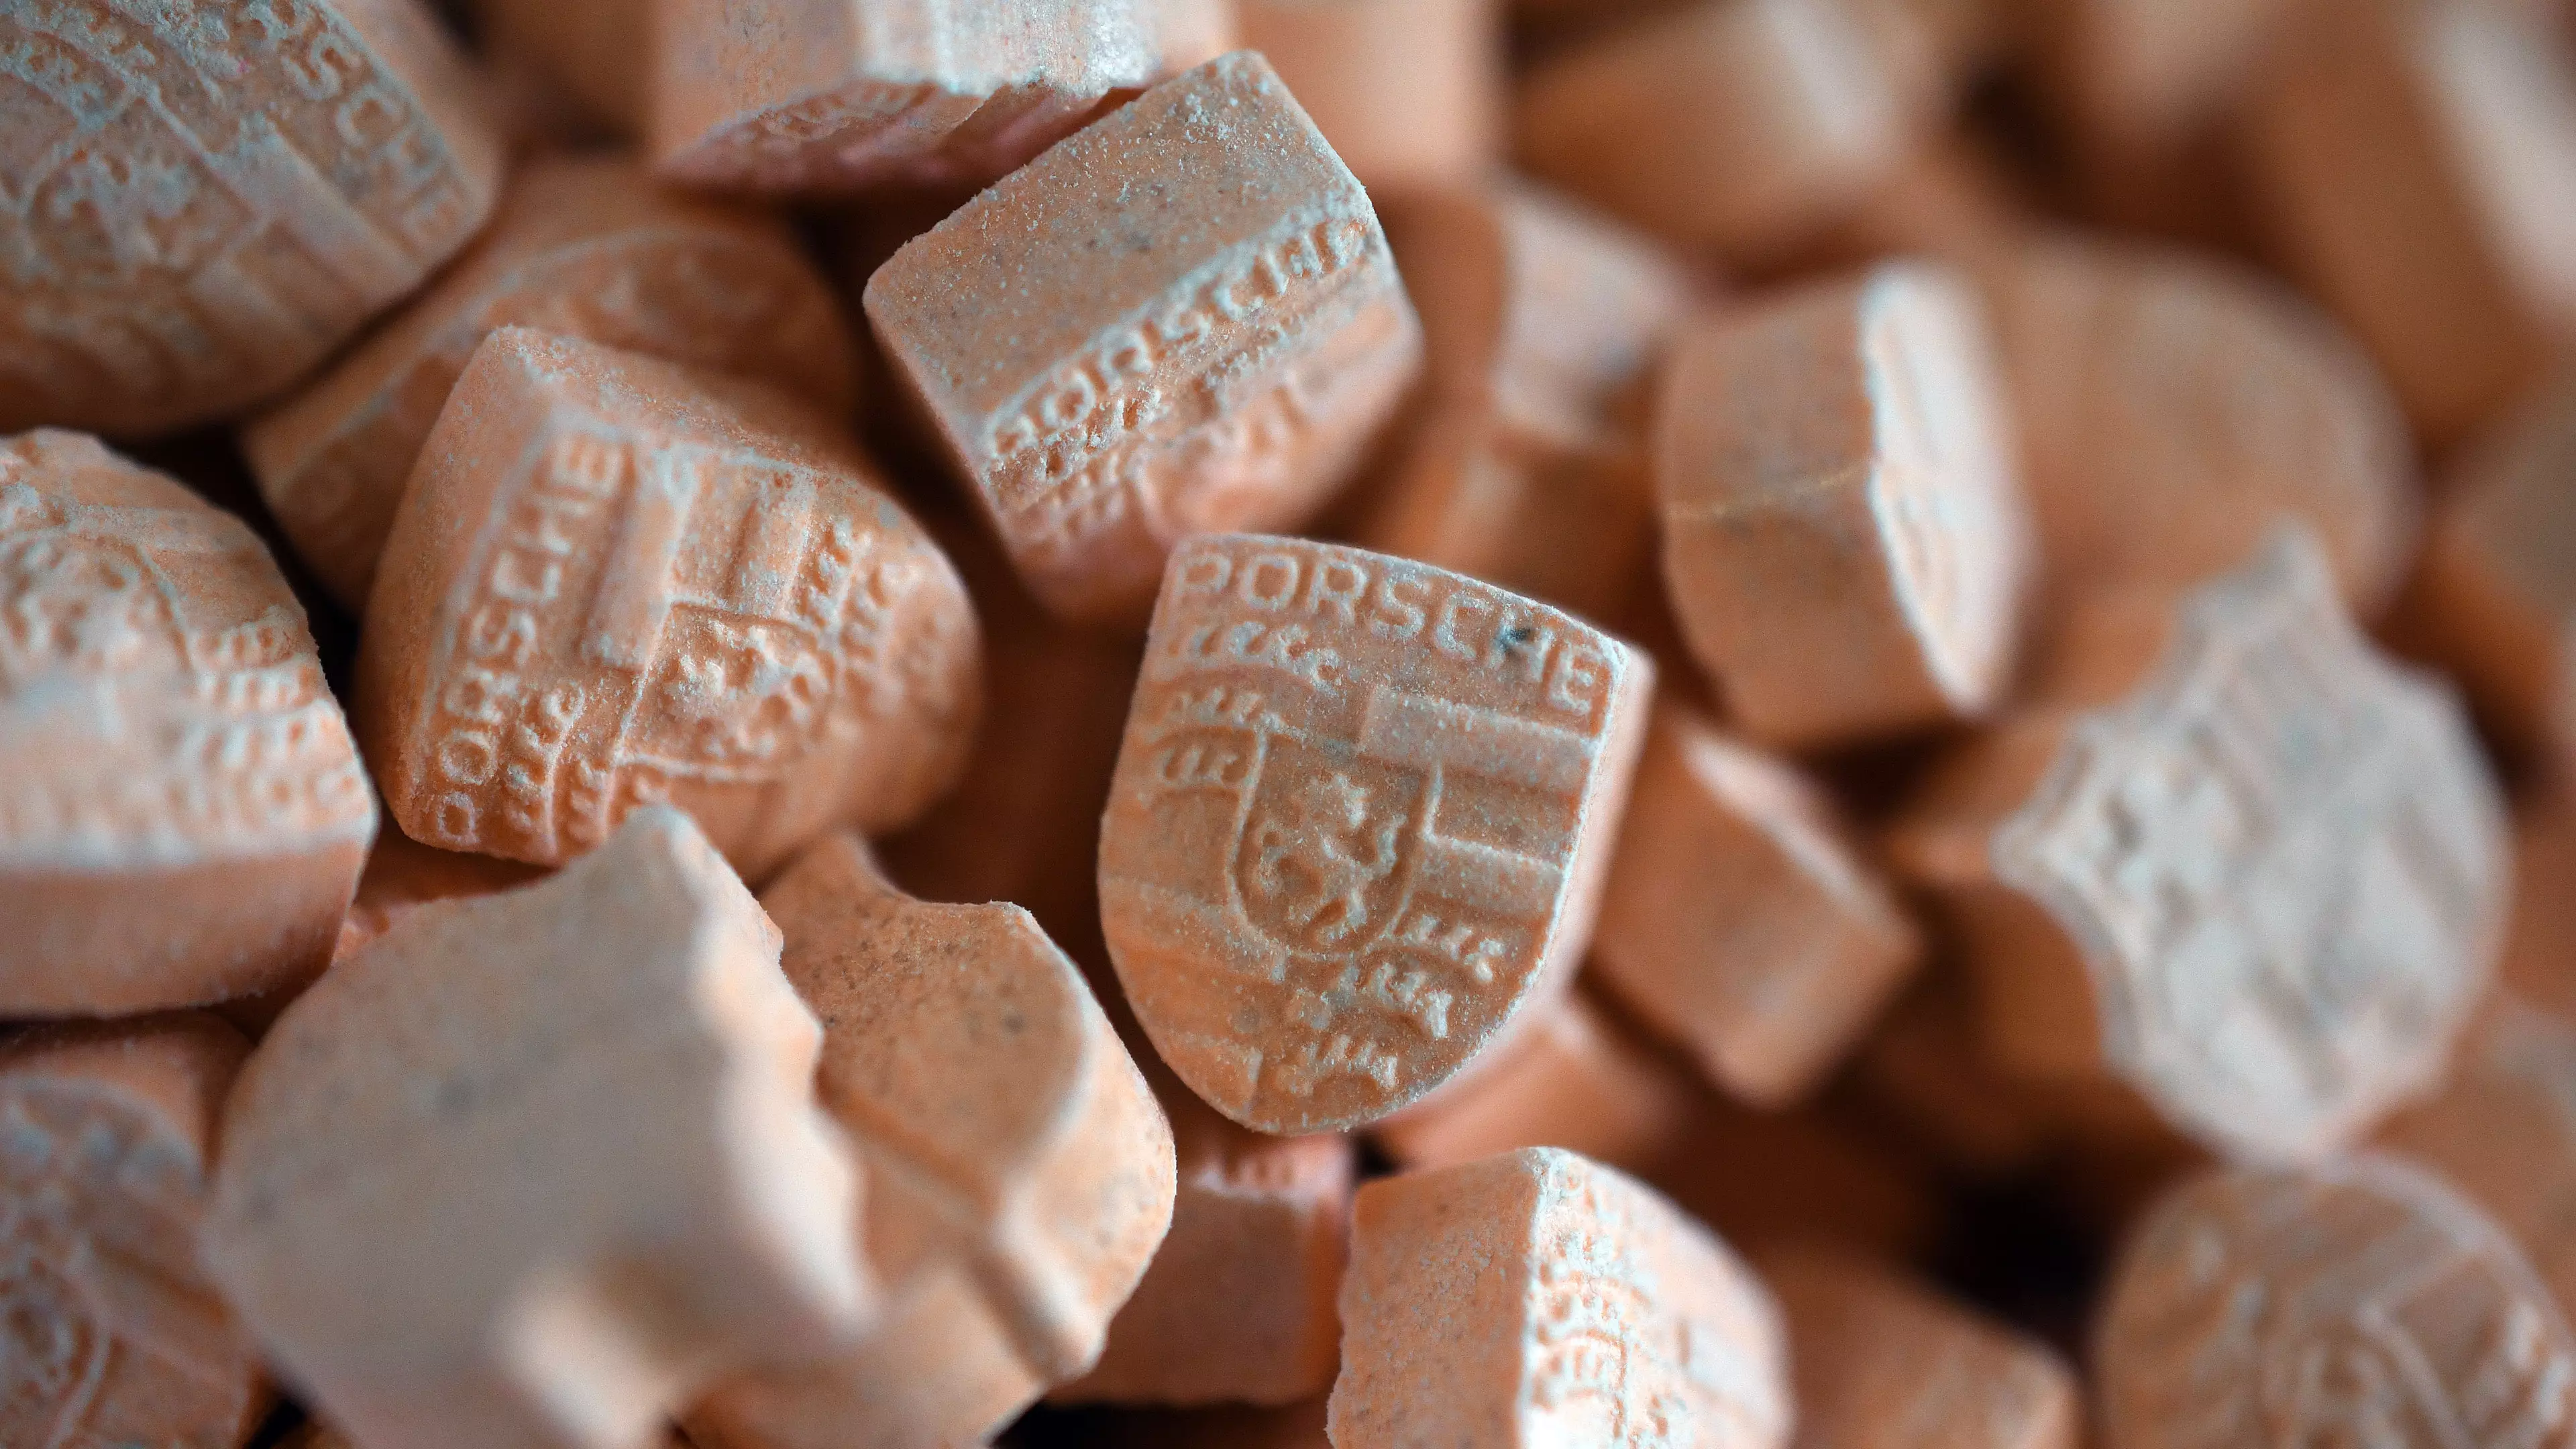 Ireland Has The Highest Proportion Of MDMA Users In The World 